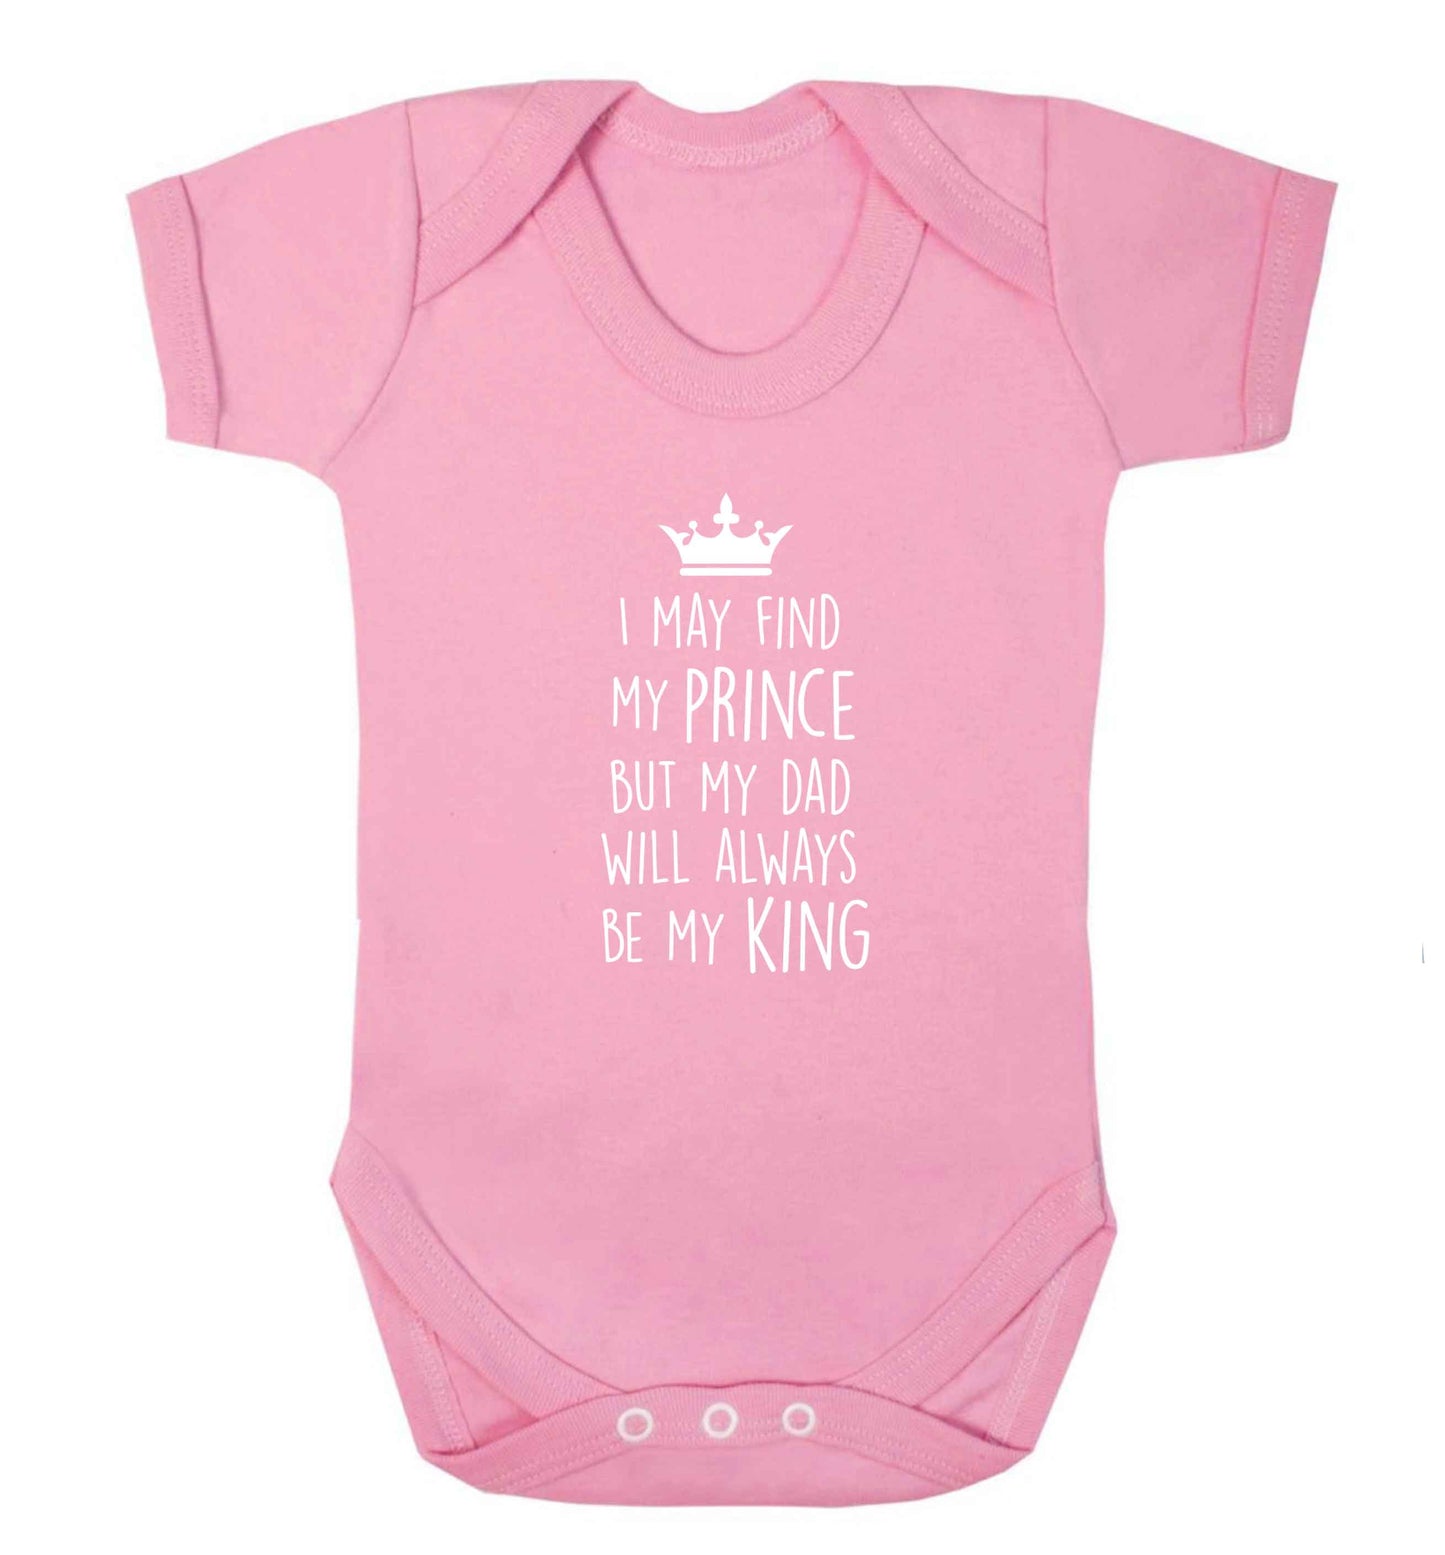 I may find my prince but my dad will always be my king baby vest pale pink 18-24 months